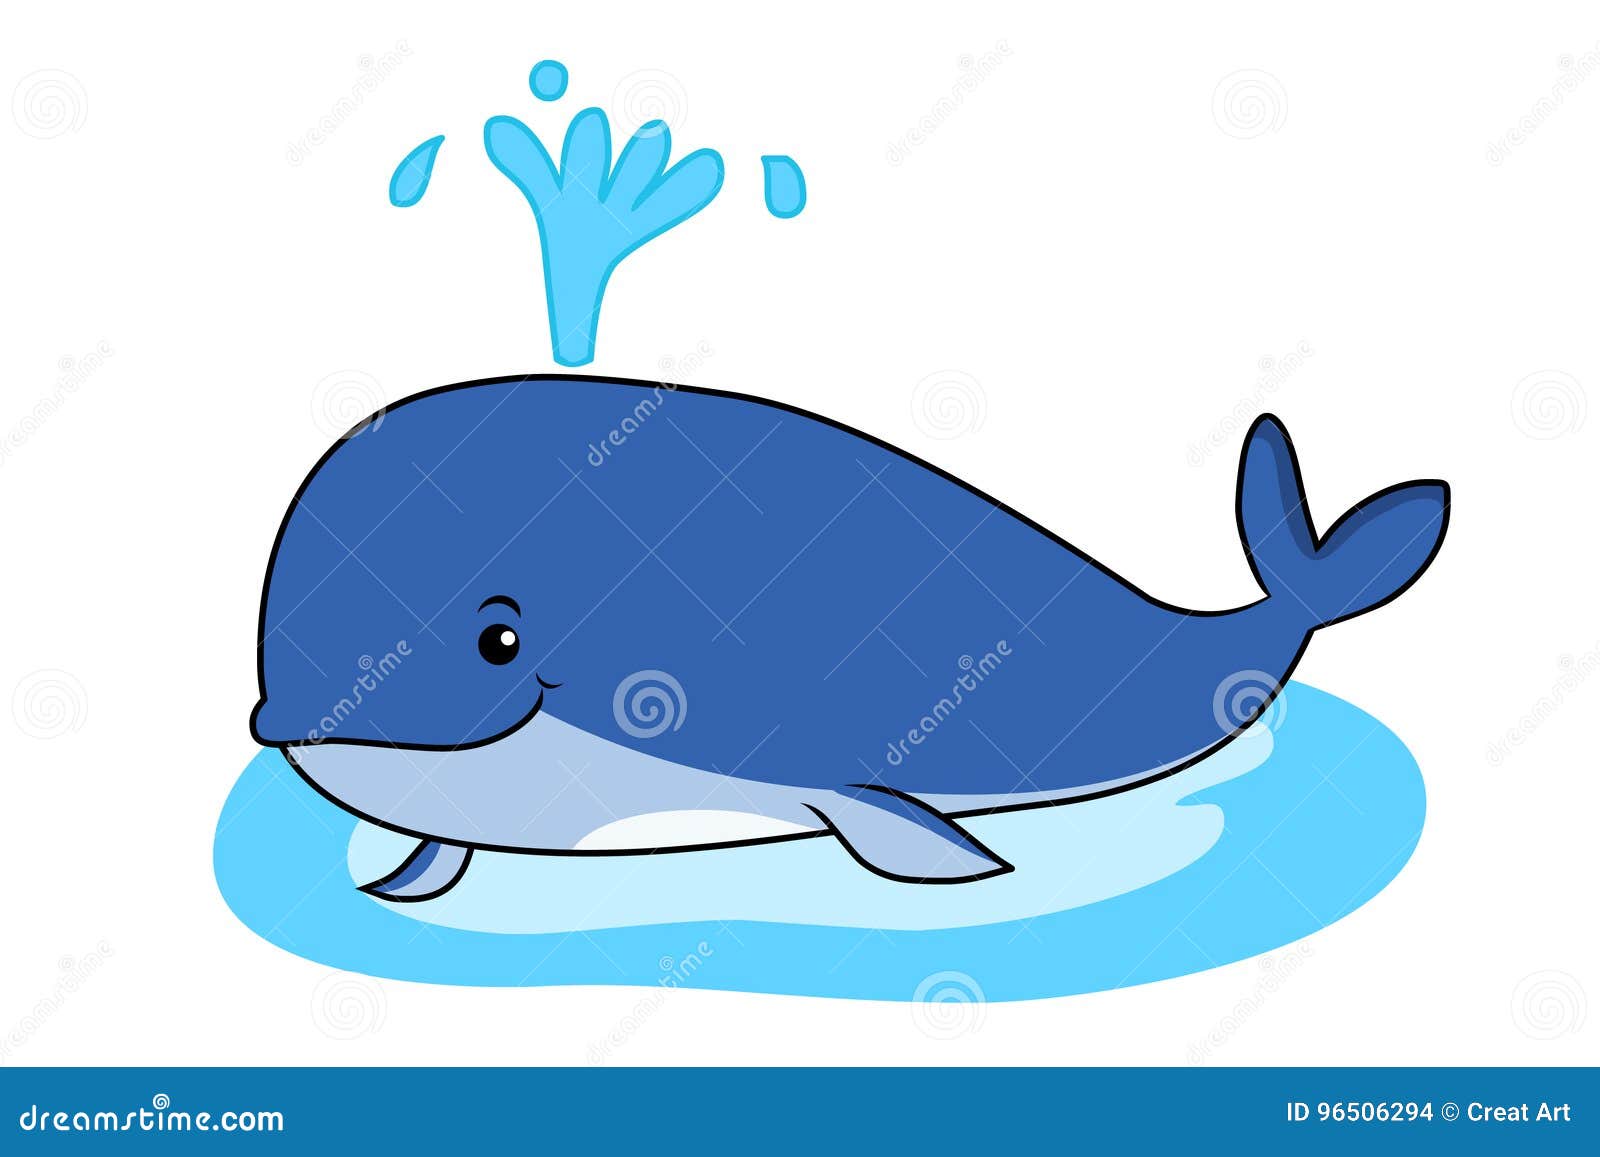 Whale stock vector. Illustration of splashing, cute, water ...